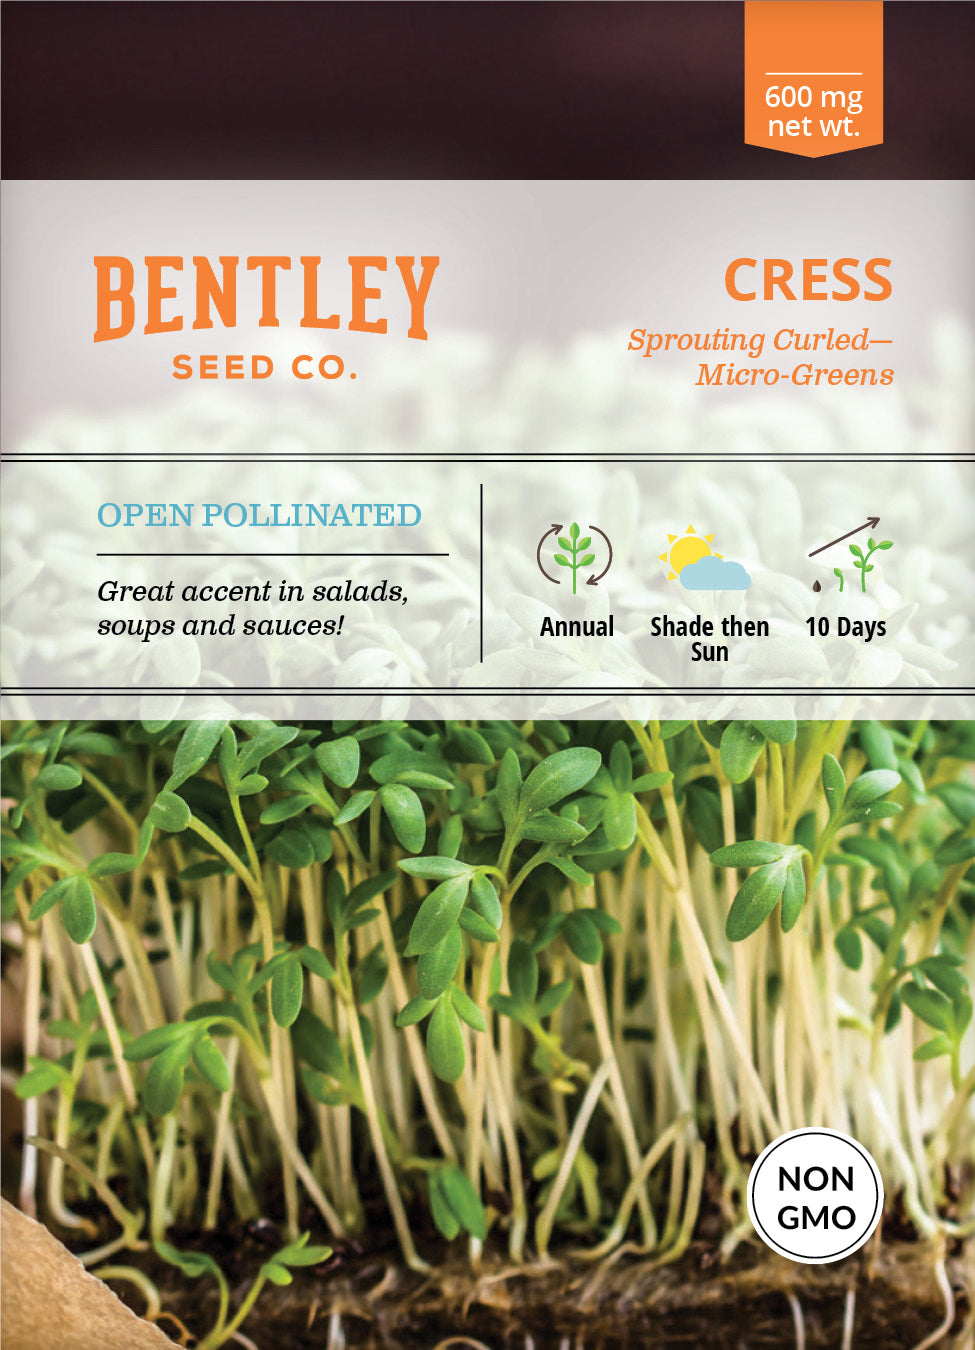 Bentley Seed Co. 20 Packs of Vegetable Seeds for Planting - Gardening Seeds to Grow in A Garden or Indoors - Get Your Own Seeds for Planting